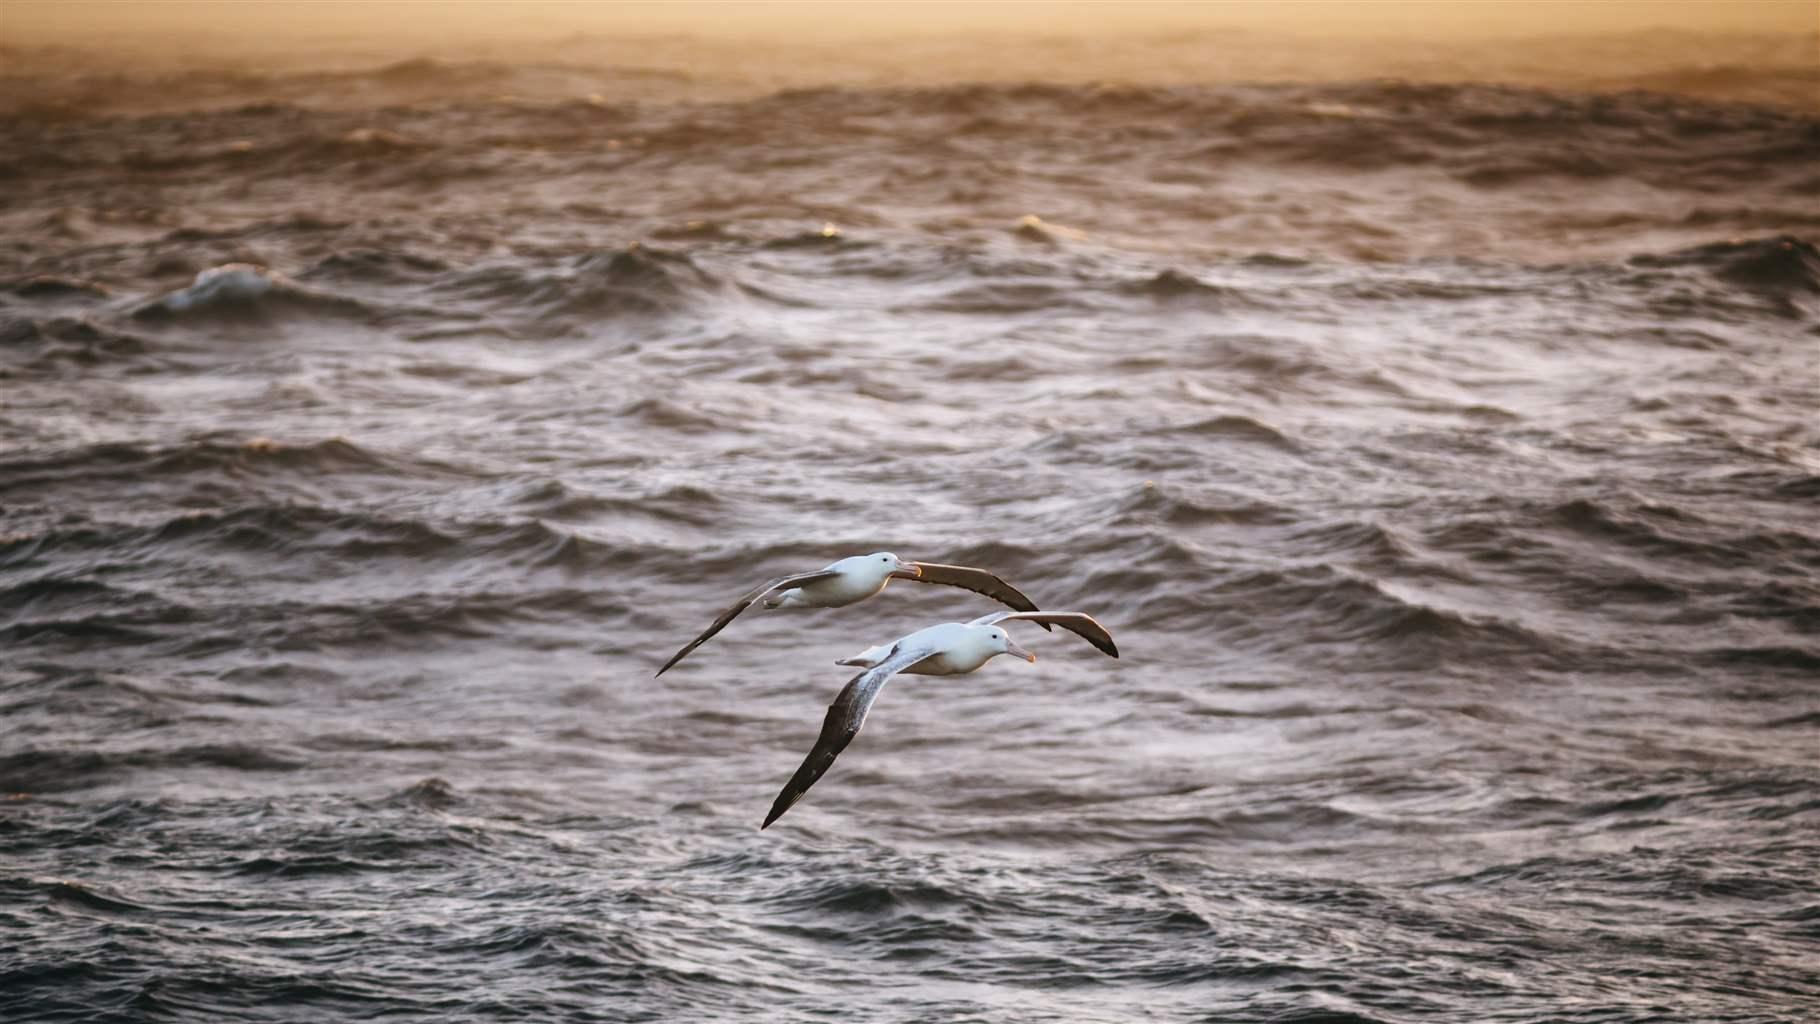  Two southern royal albatrosses fly low over the Southern Ocean.